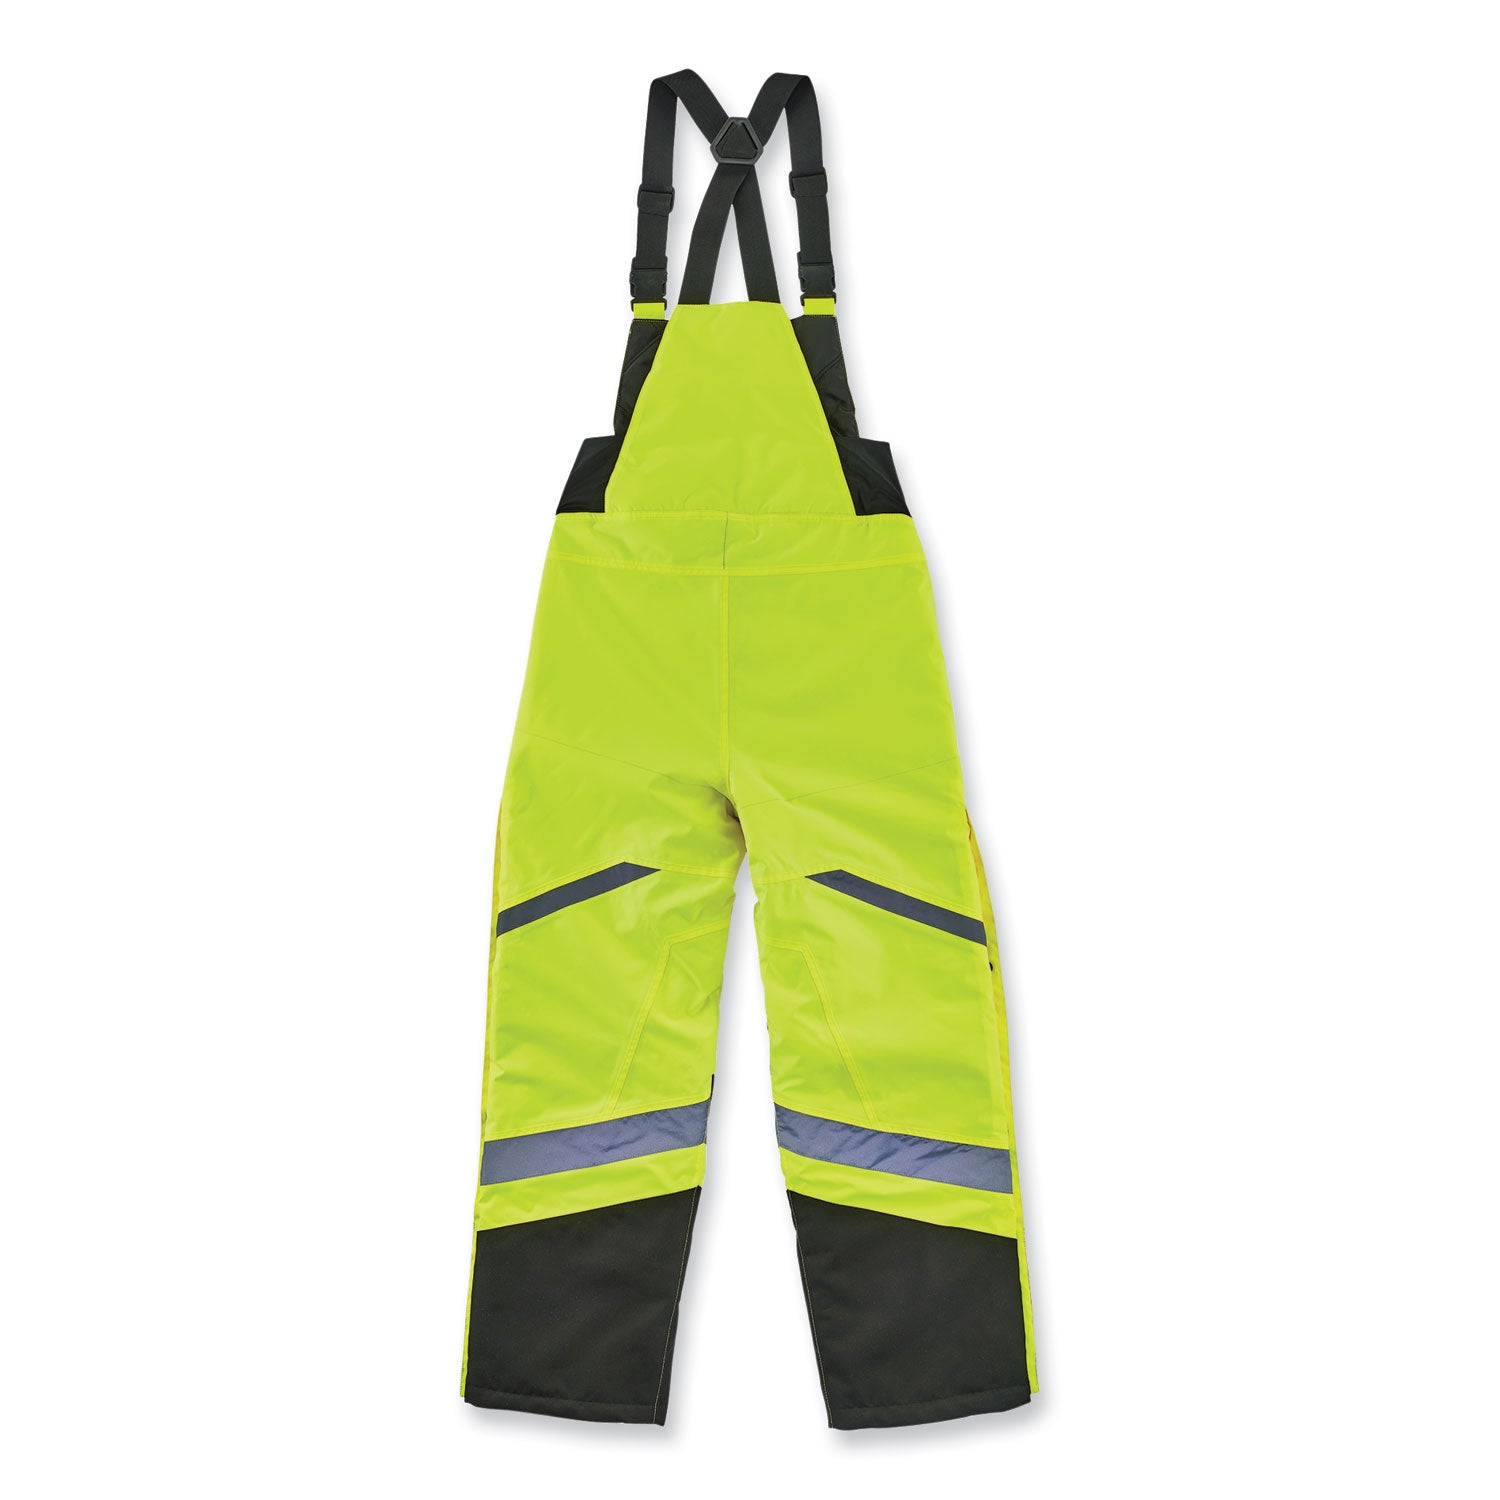 glowear-8928-class-e-hi-vis-insulated-bibs-small-lime-ships-in-1-3-business-days_ego25522 - 2